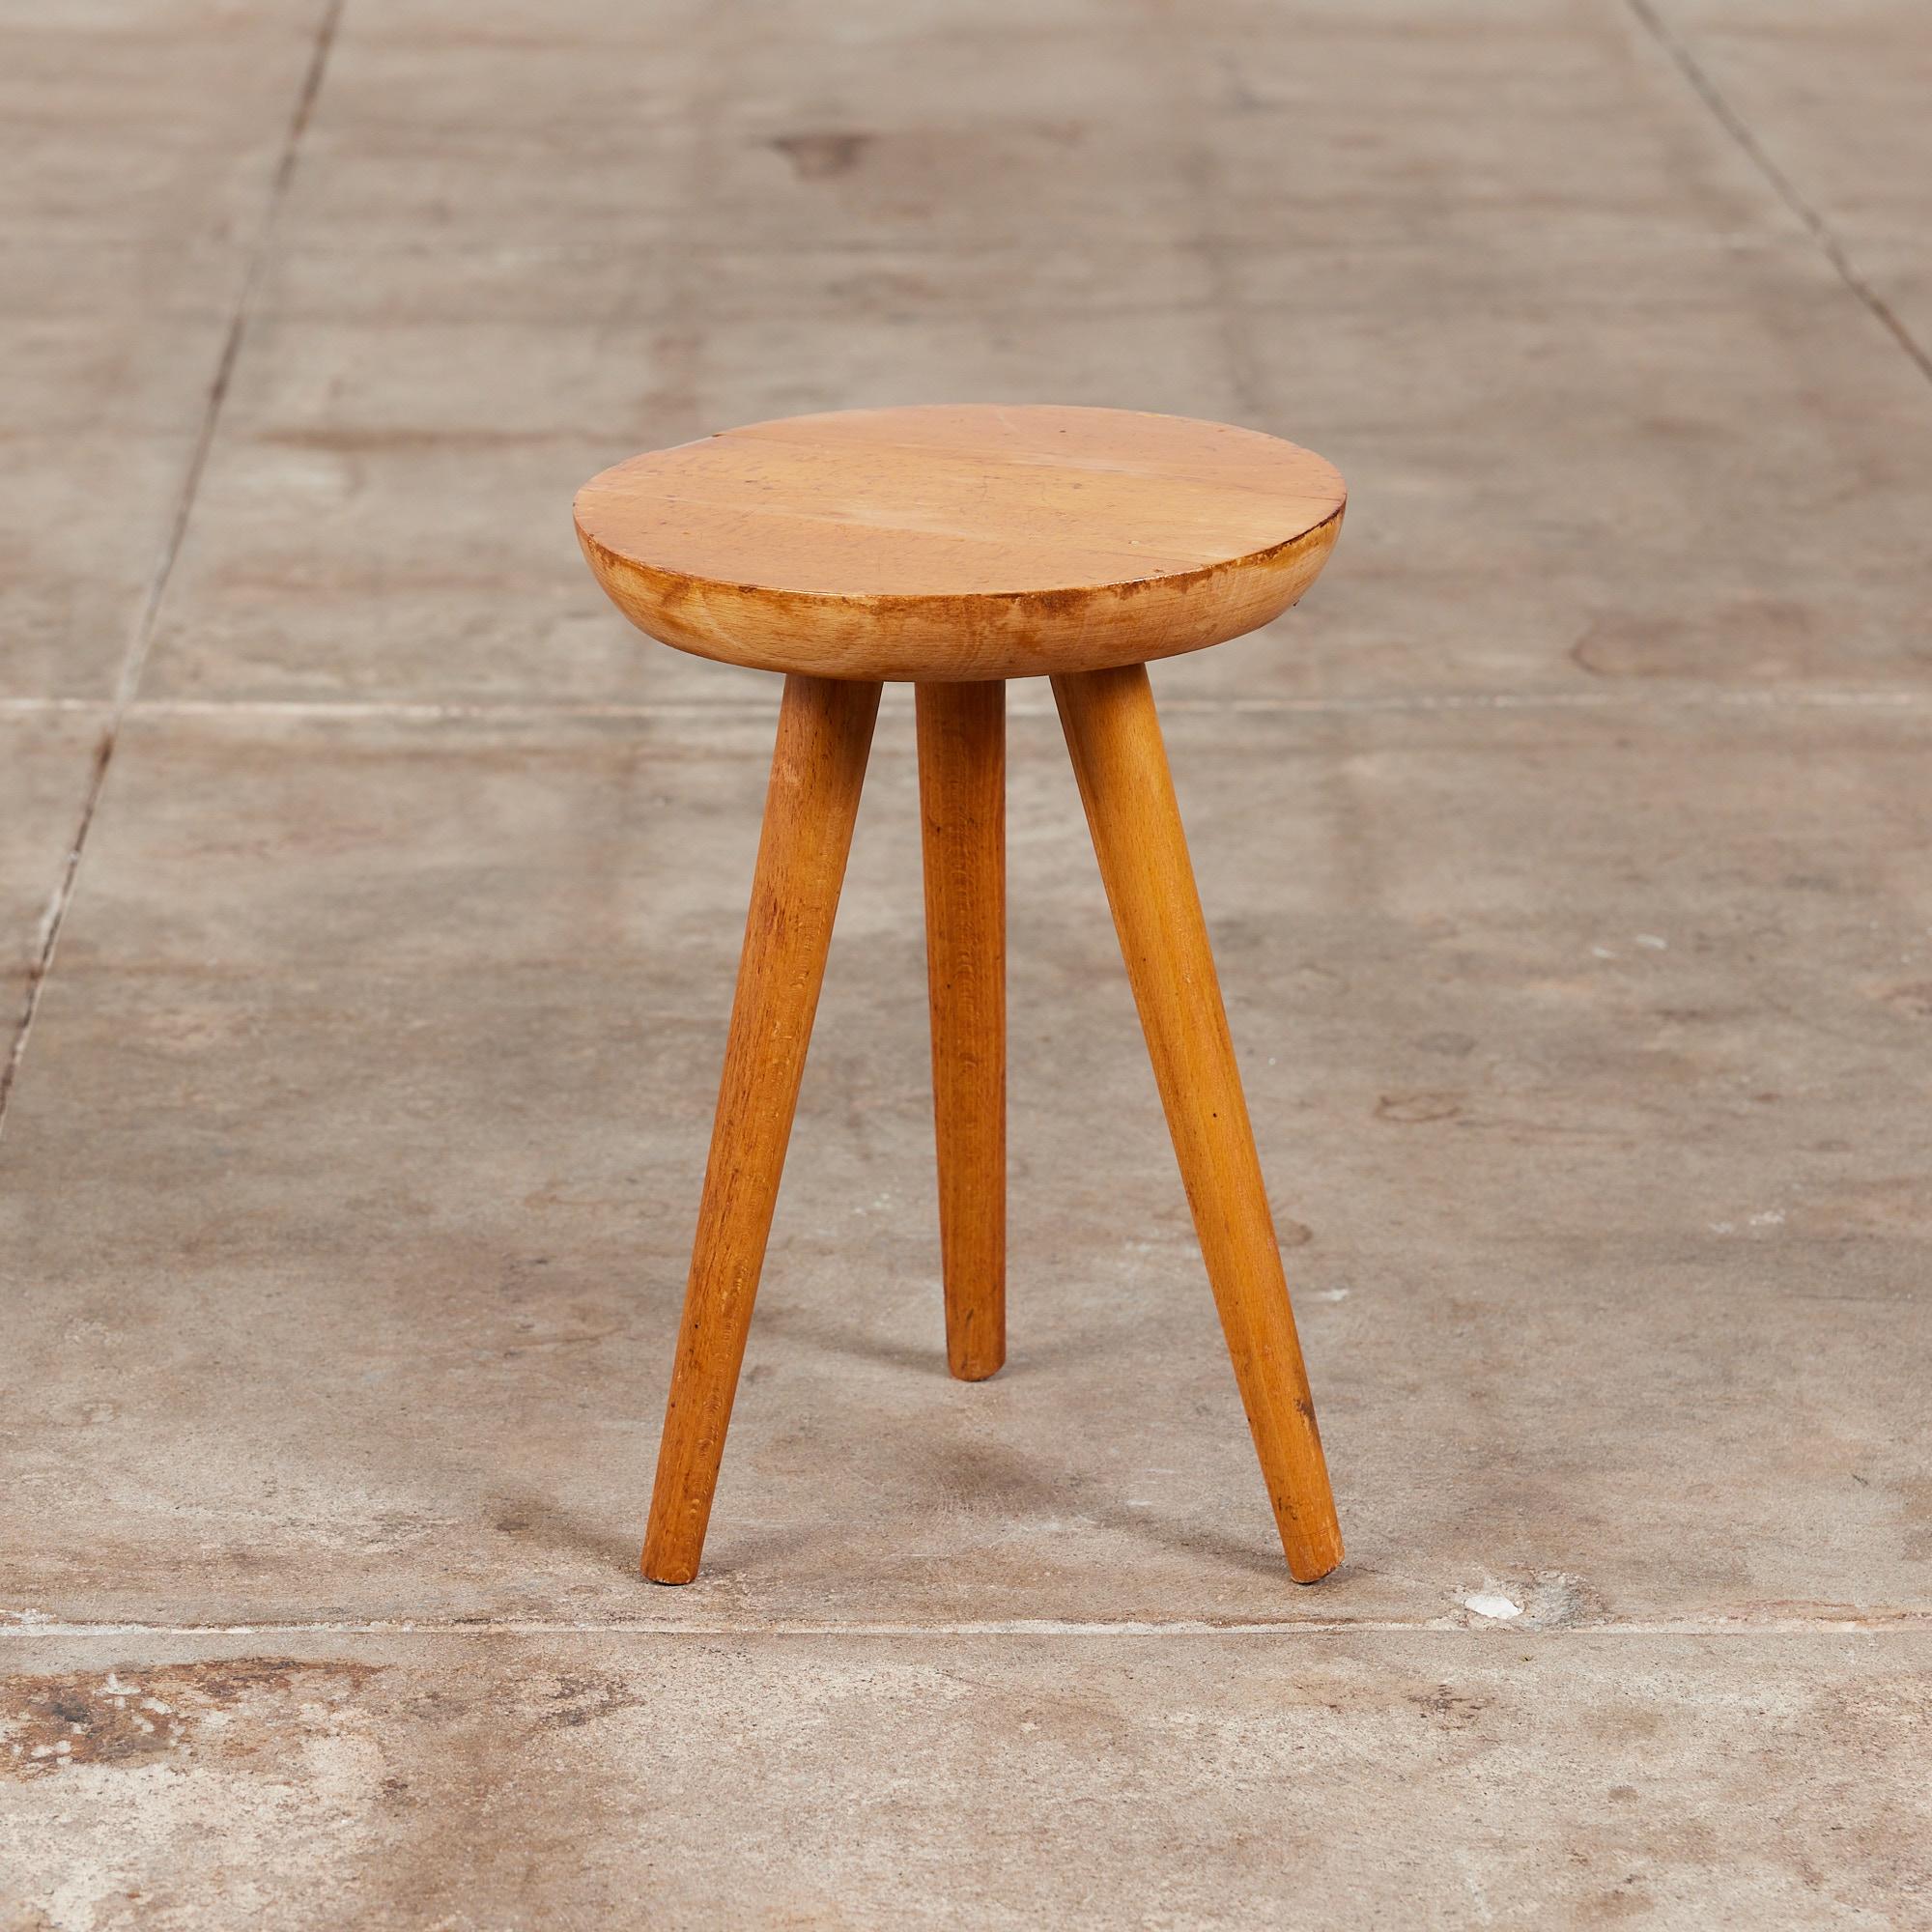 Patinated wooden tripod milking stool. The stool features a thick hand carved rounded seat with visible growth rings, that sits atop three turned wooden legs.

Measurements:
9